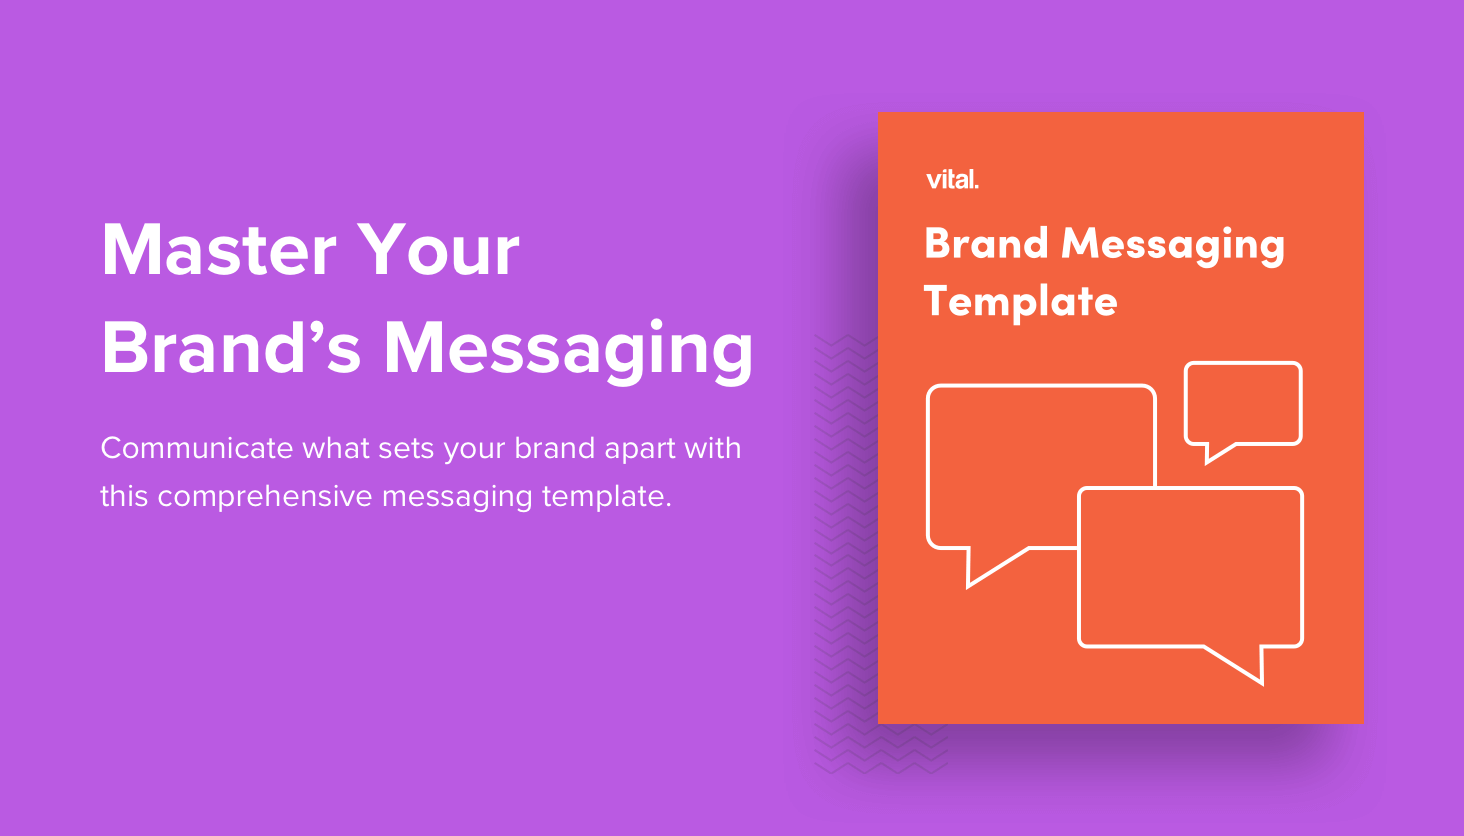 Master your brand's Messaging. Communicate what sets your brand apart with this comprehensive messaging template.